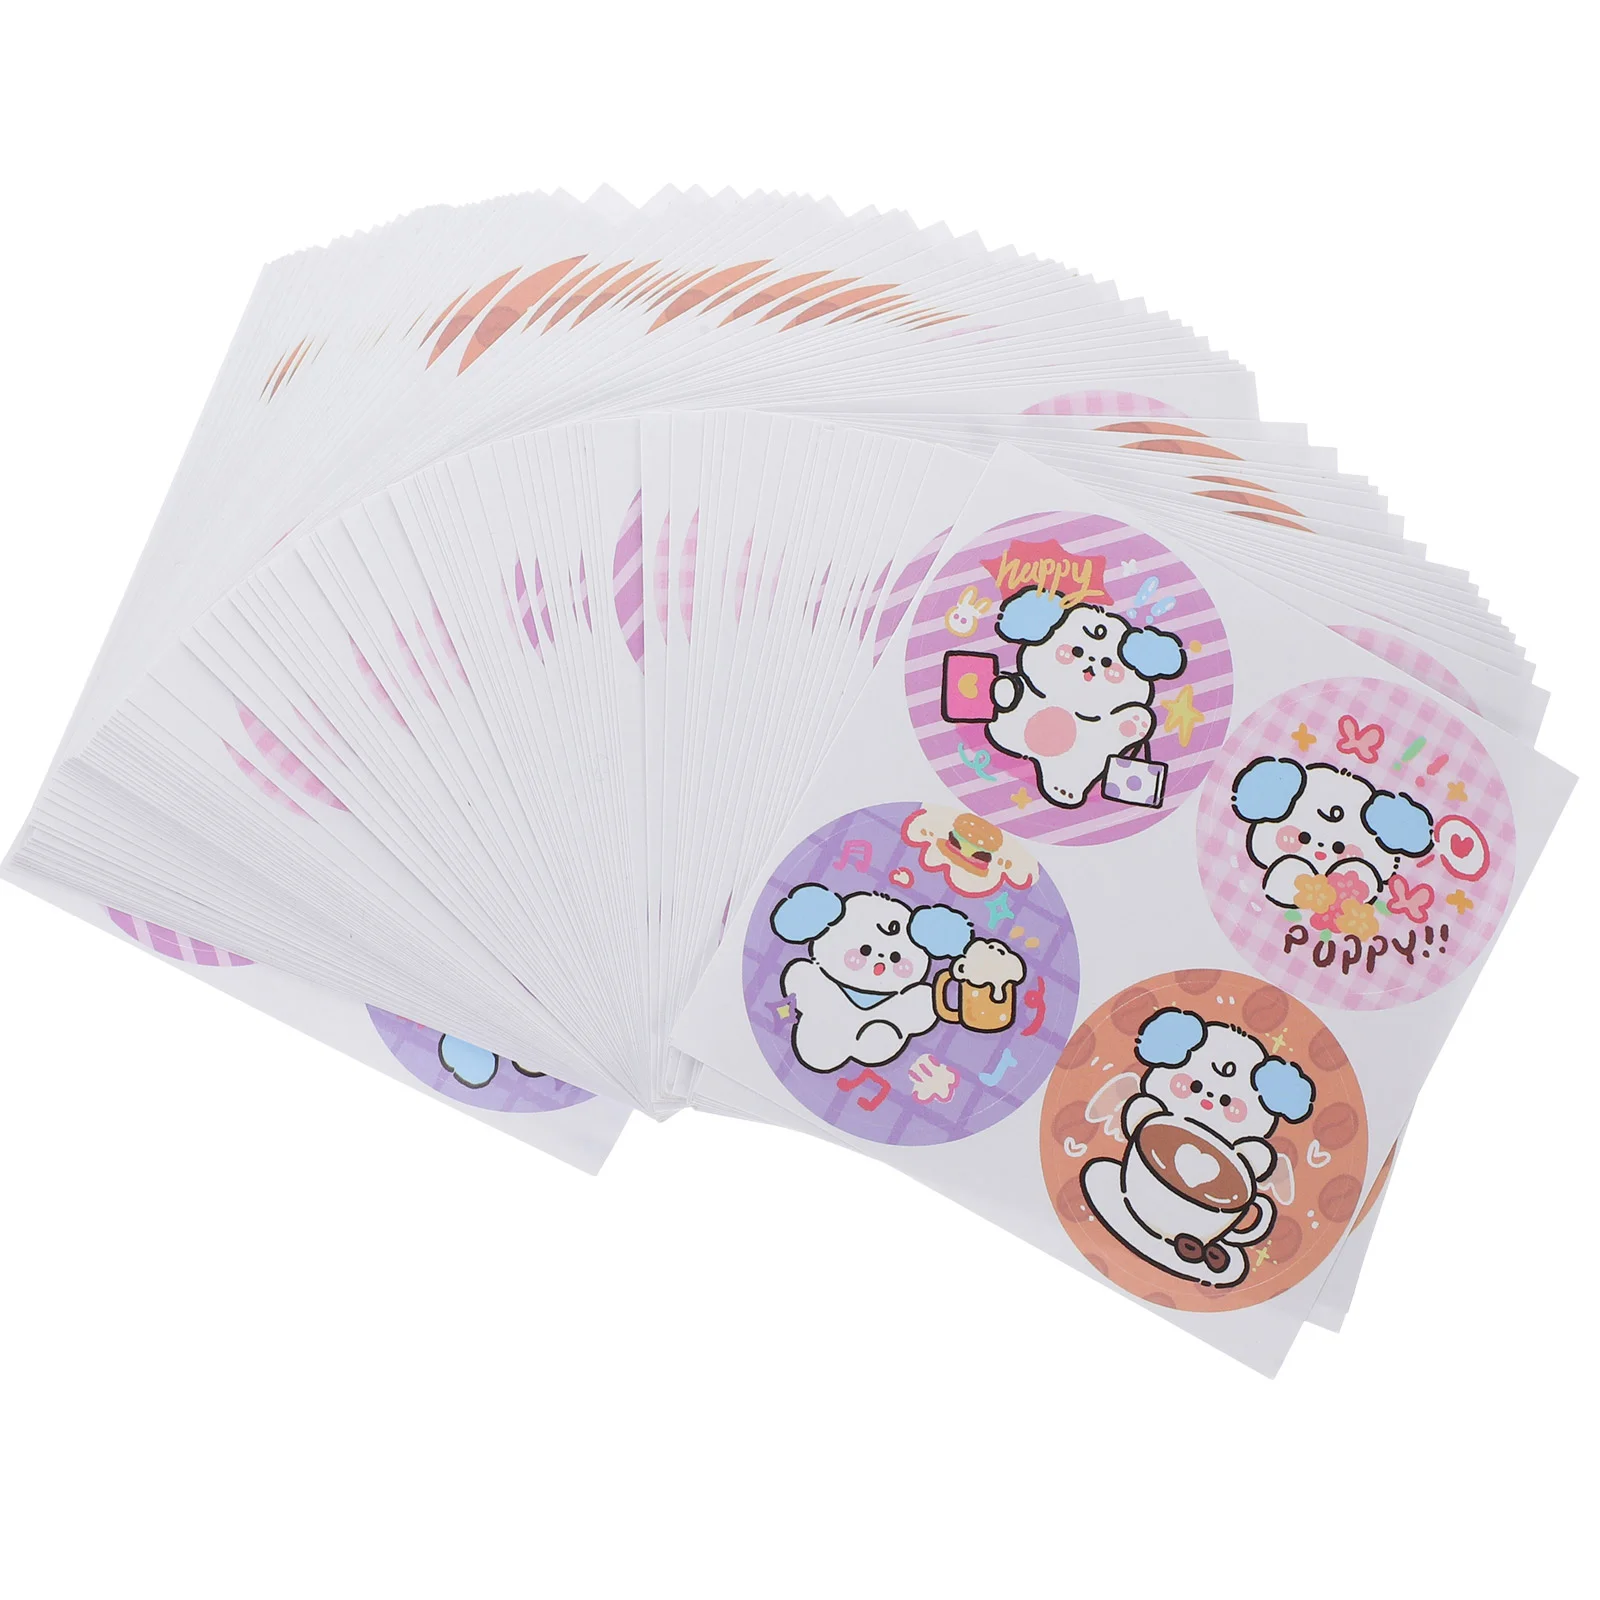 100 Sheets Puppy Stickers Gift for Presents Cartoon Label Dot Classification Self-adhesive Paper Round Labels